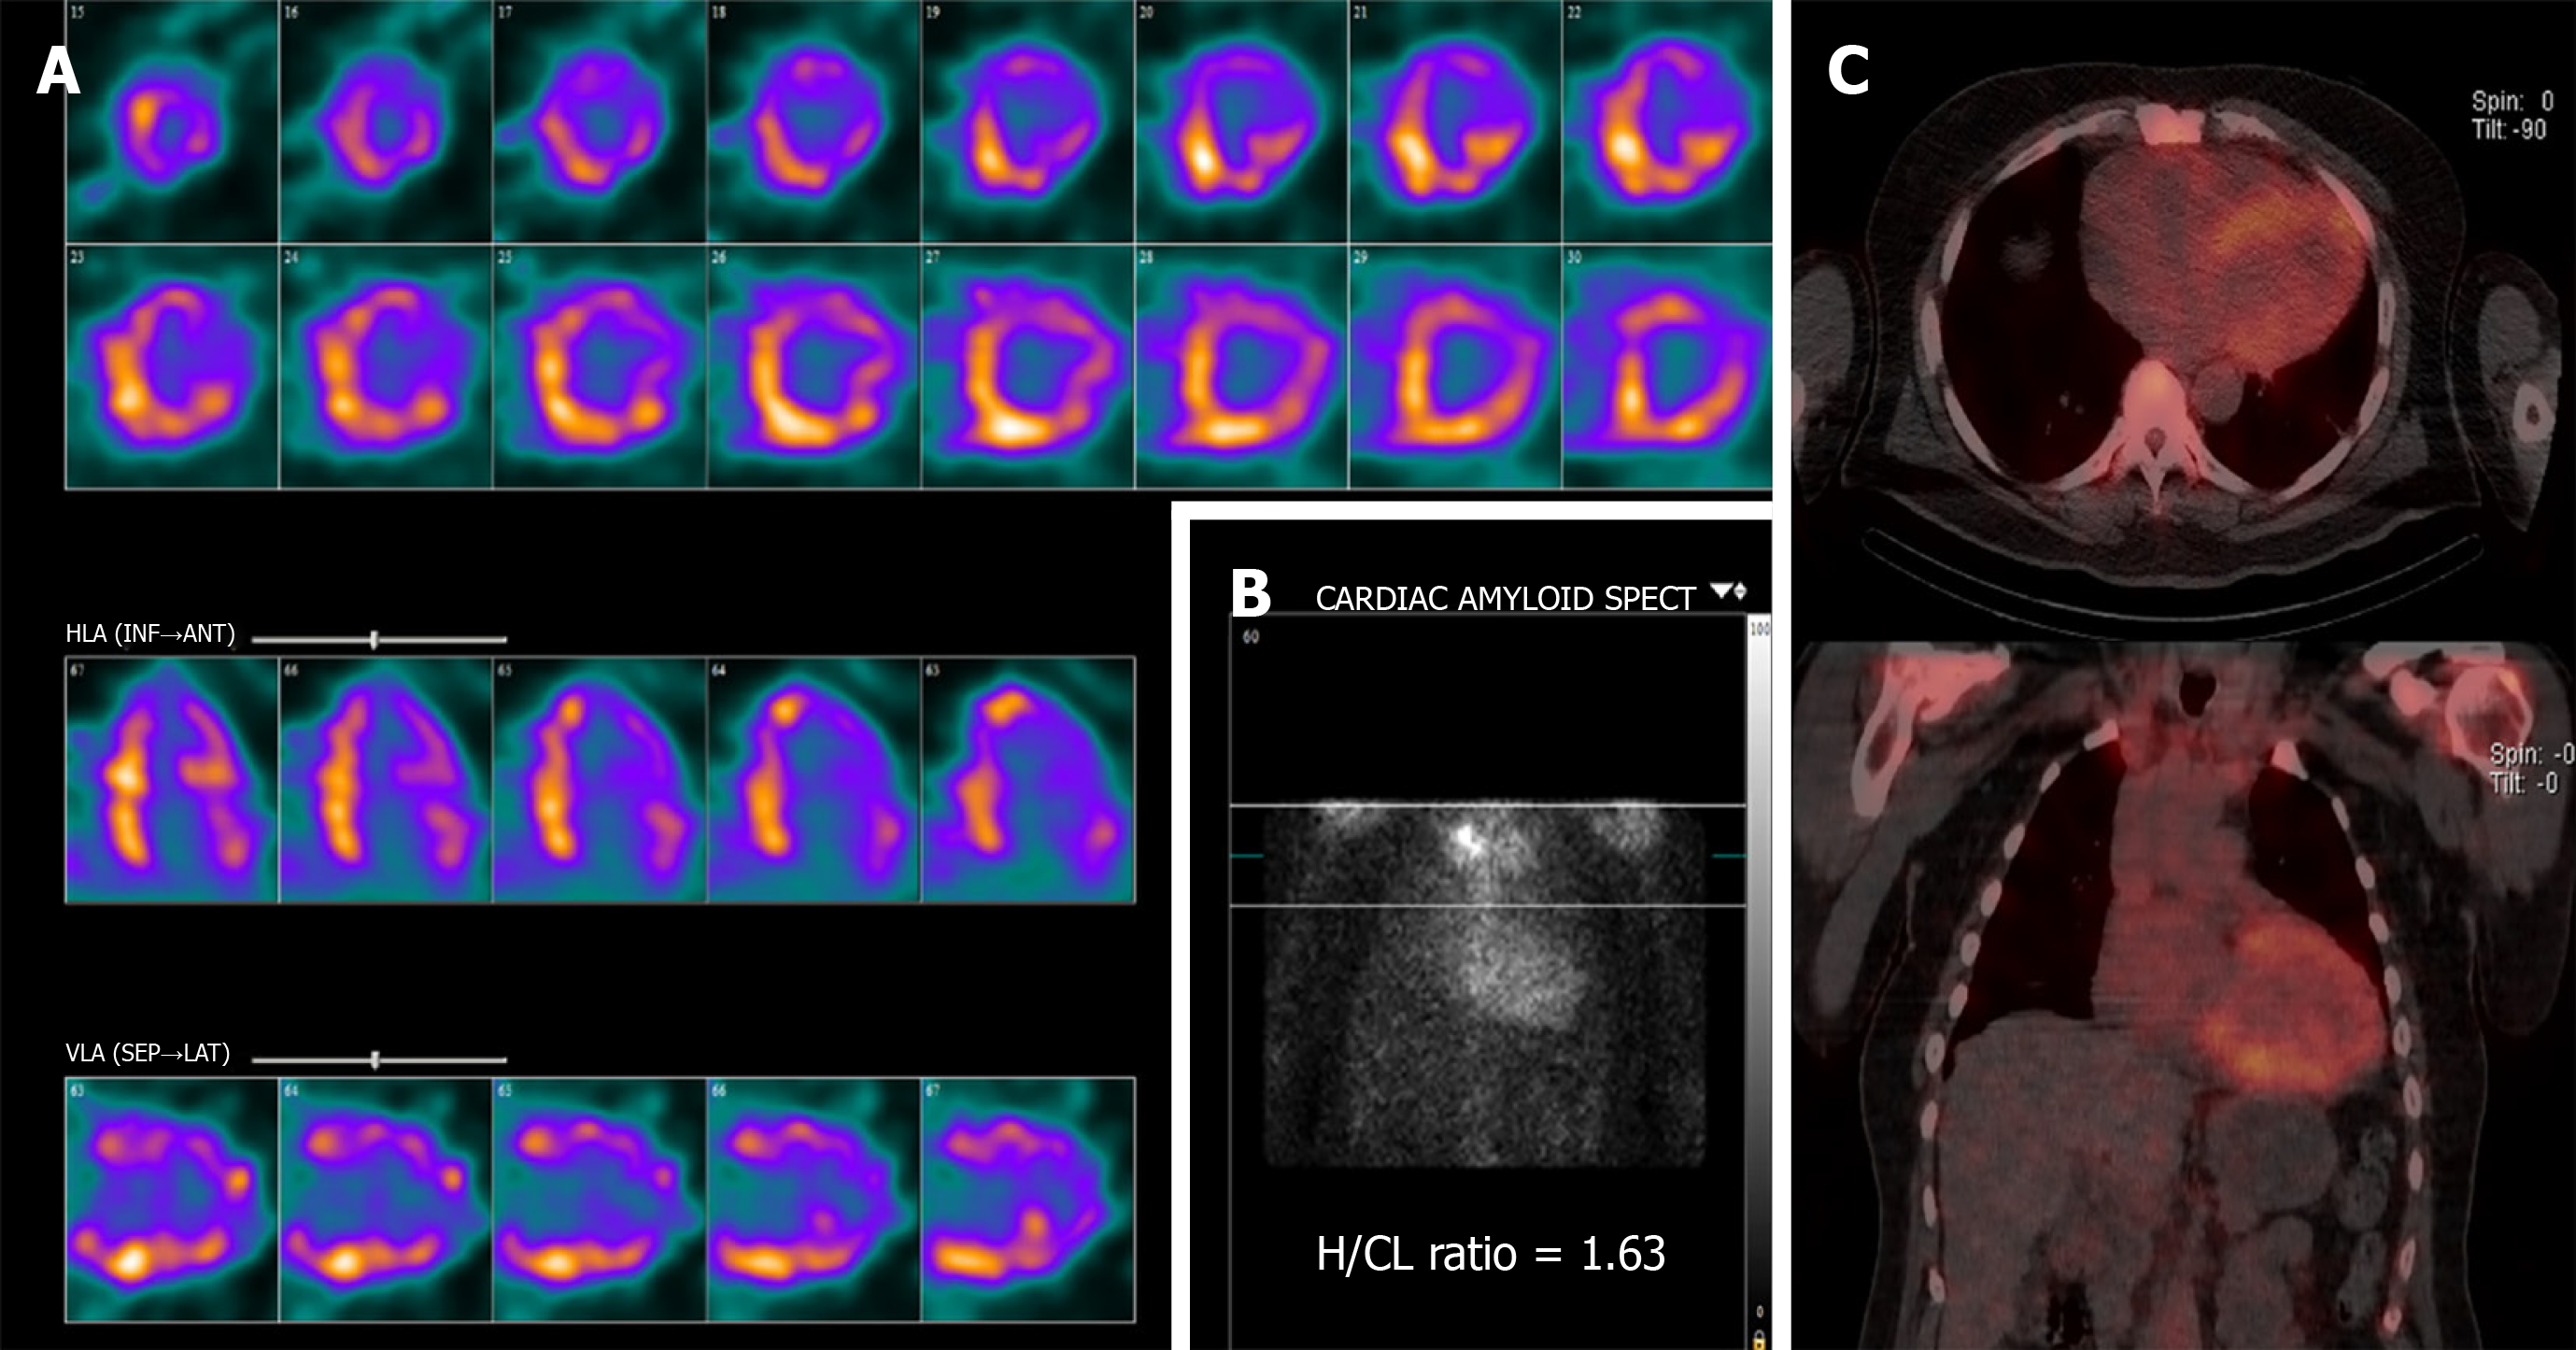 Global and Regional Variations in Transthyretin Cardiac Amyloidosis: A  Comparison of Longitudinal Strain and 99mTc-Pyrophosphate Imaging